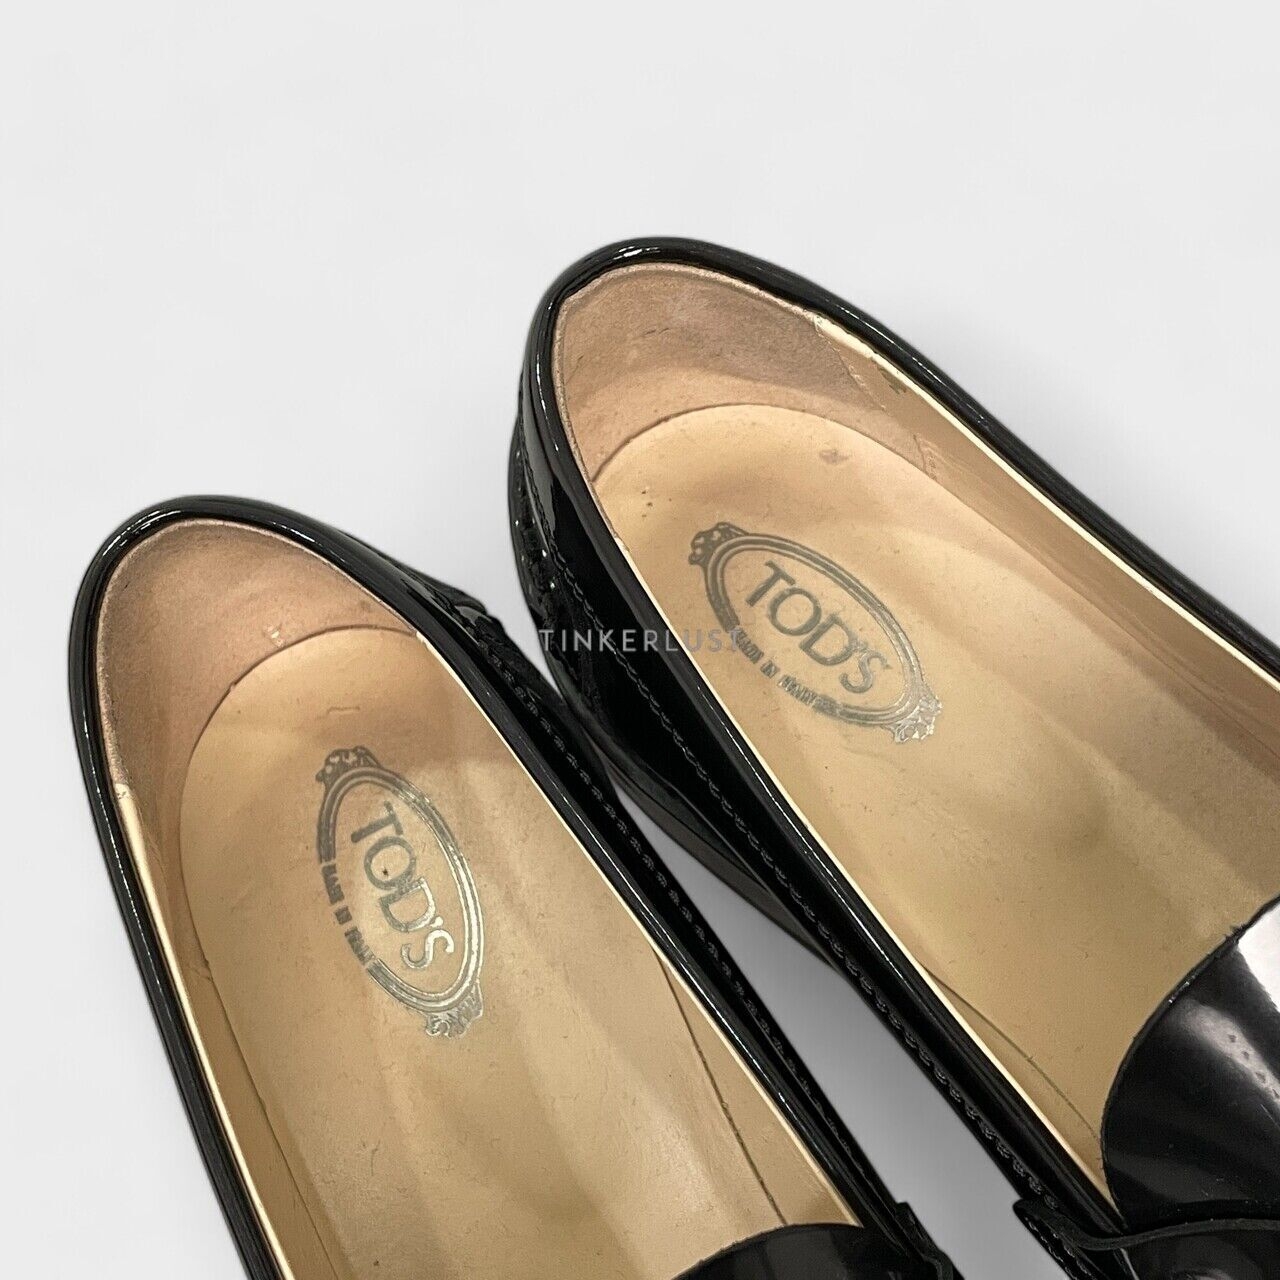 Tod's Gomma Basso Black Patent Loafers